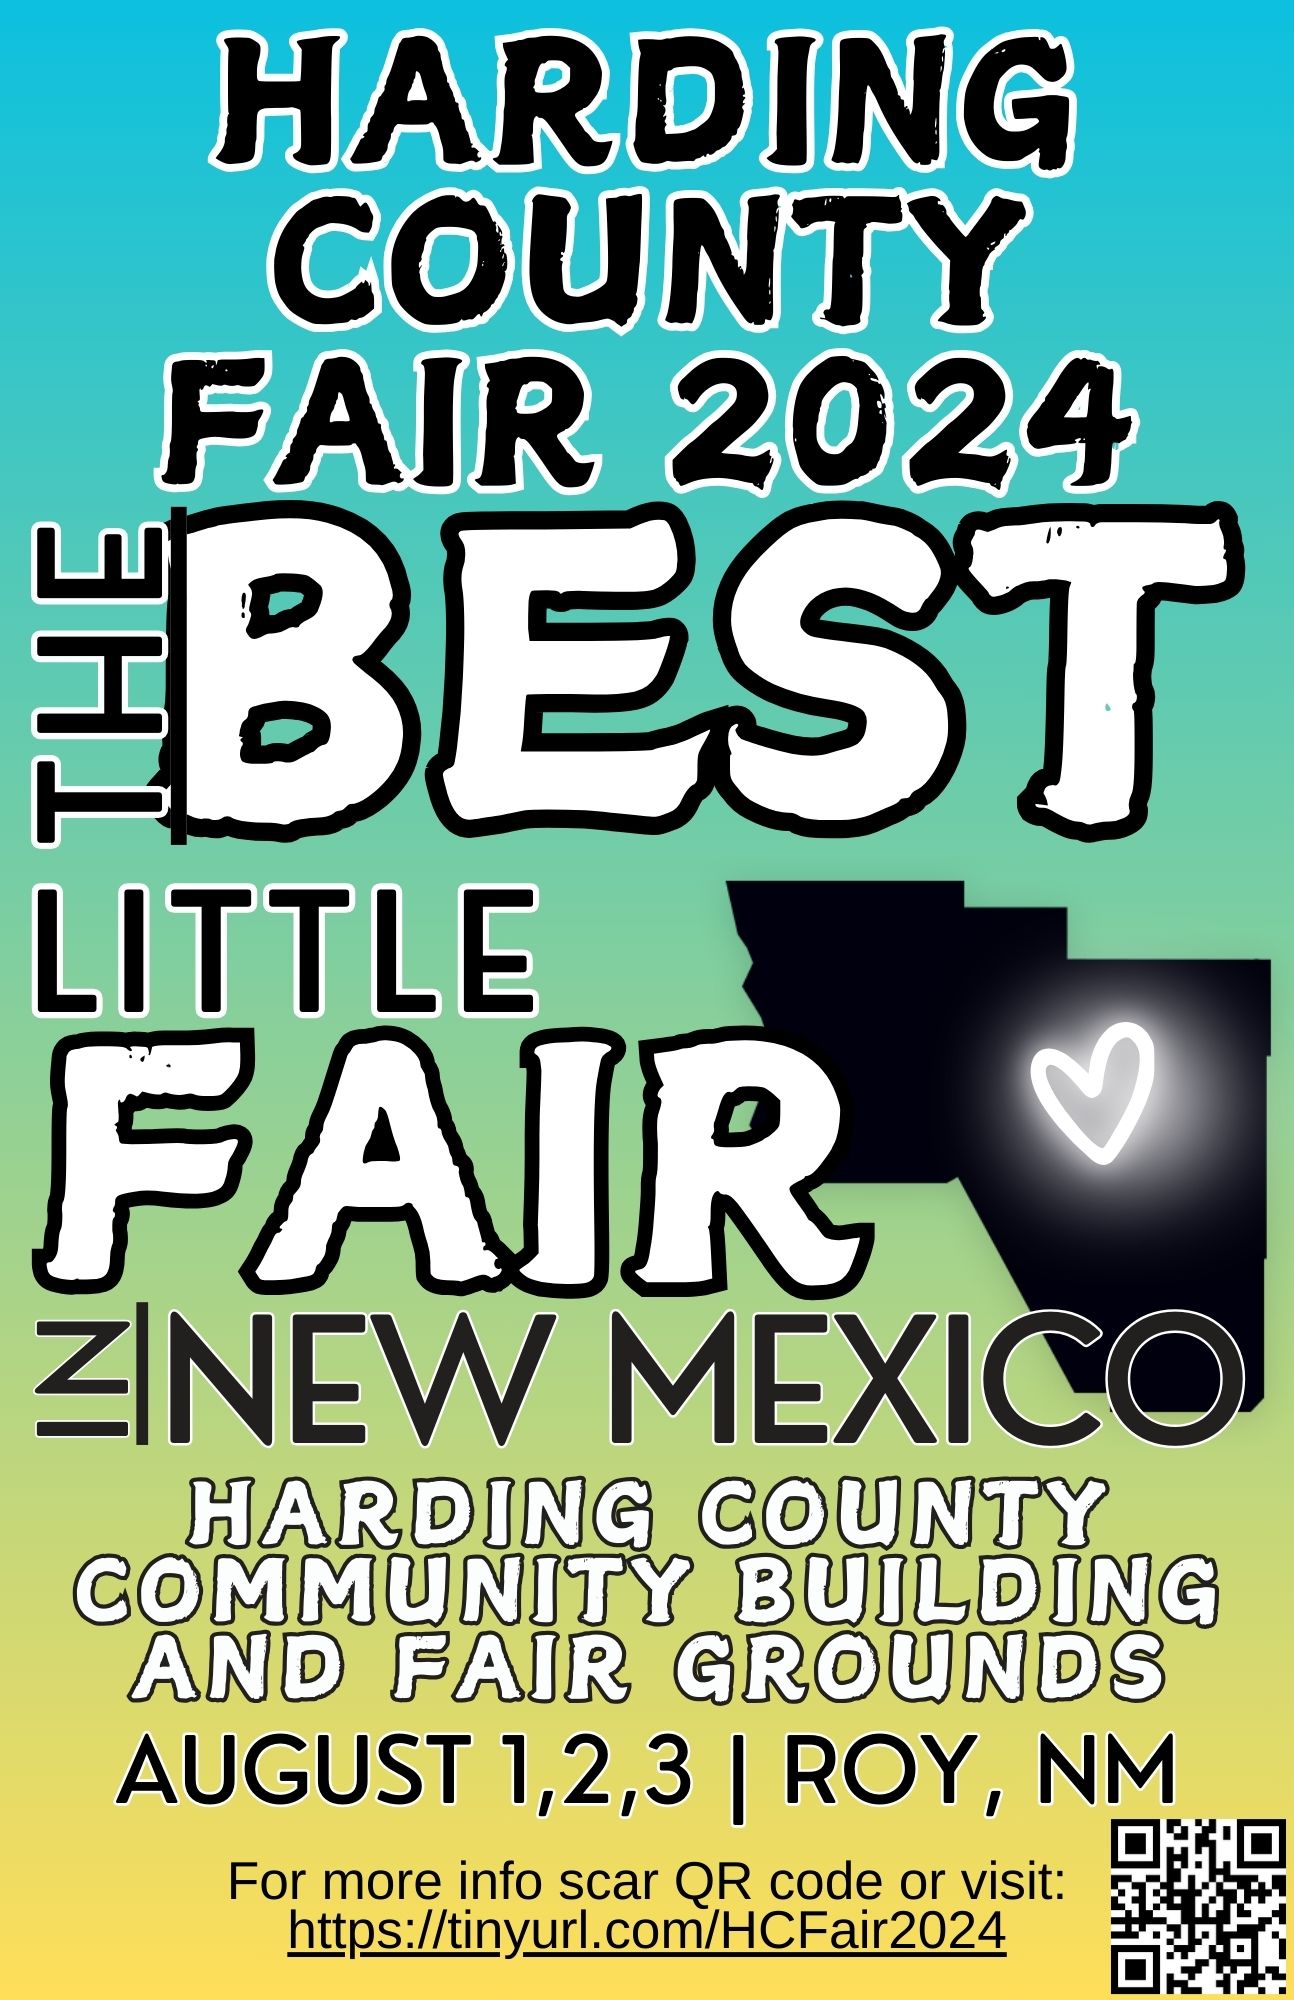 Harding County Fair 2024. The Best Little Fair in New Mexico. Harding County Community Building and Fair Grounds. August 1, 2, 3 in Roy, NM